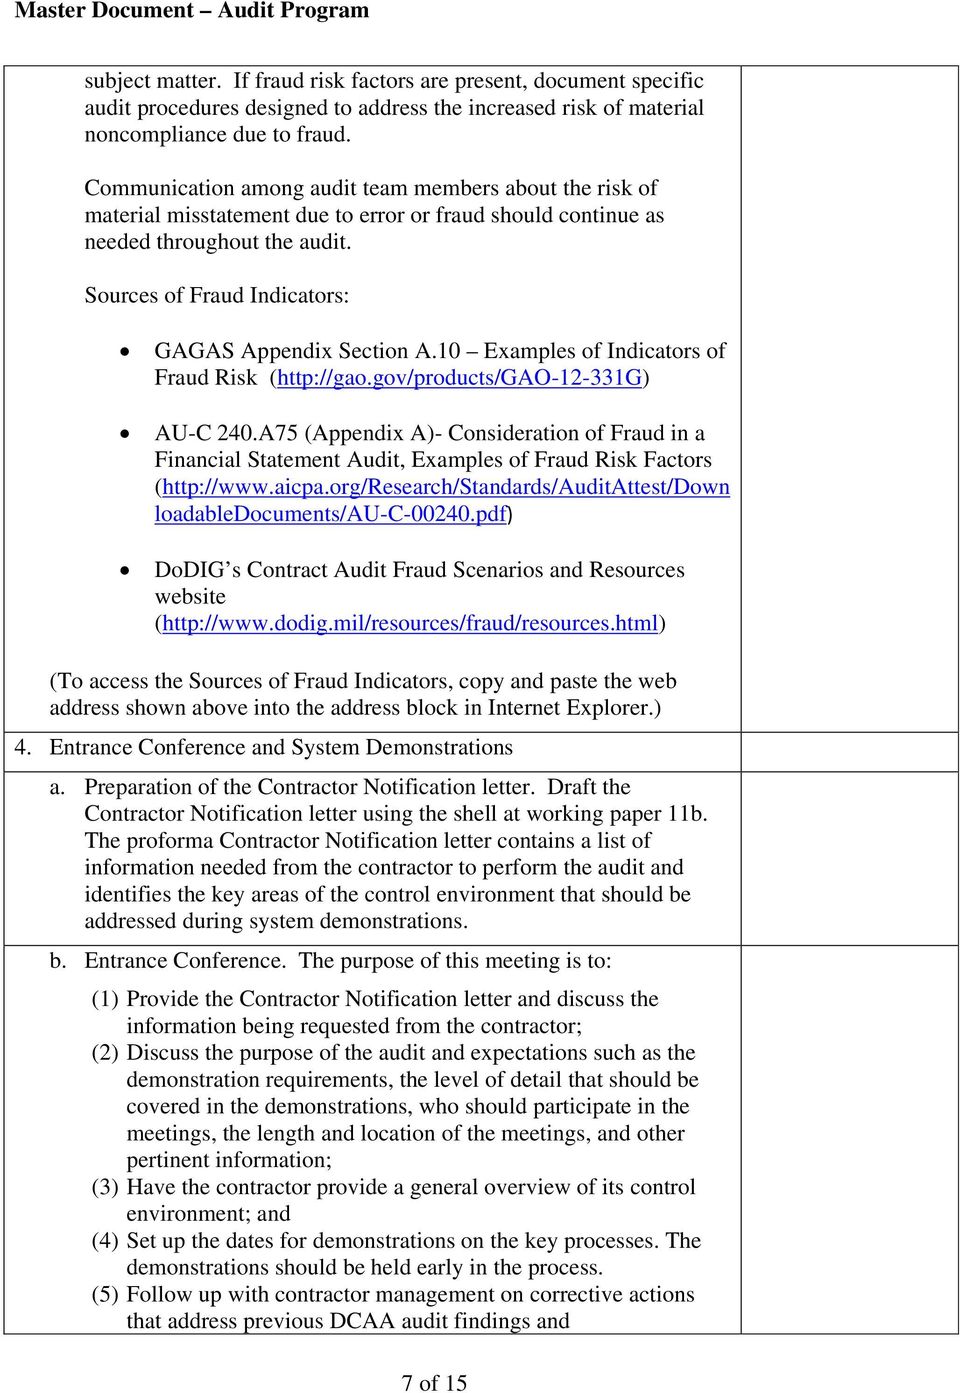 Sources of Fraud Indicators: GAGAS Appendix Section A.10 Examples of Indicators of Fraud Risk (http://gao.gov/products/gao-12-331g) AU-C 240.